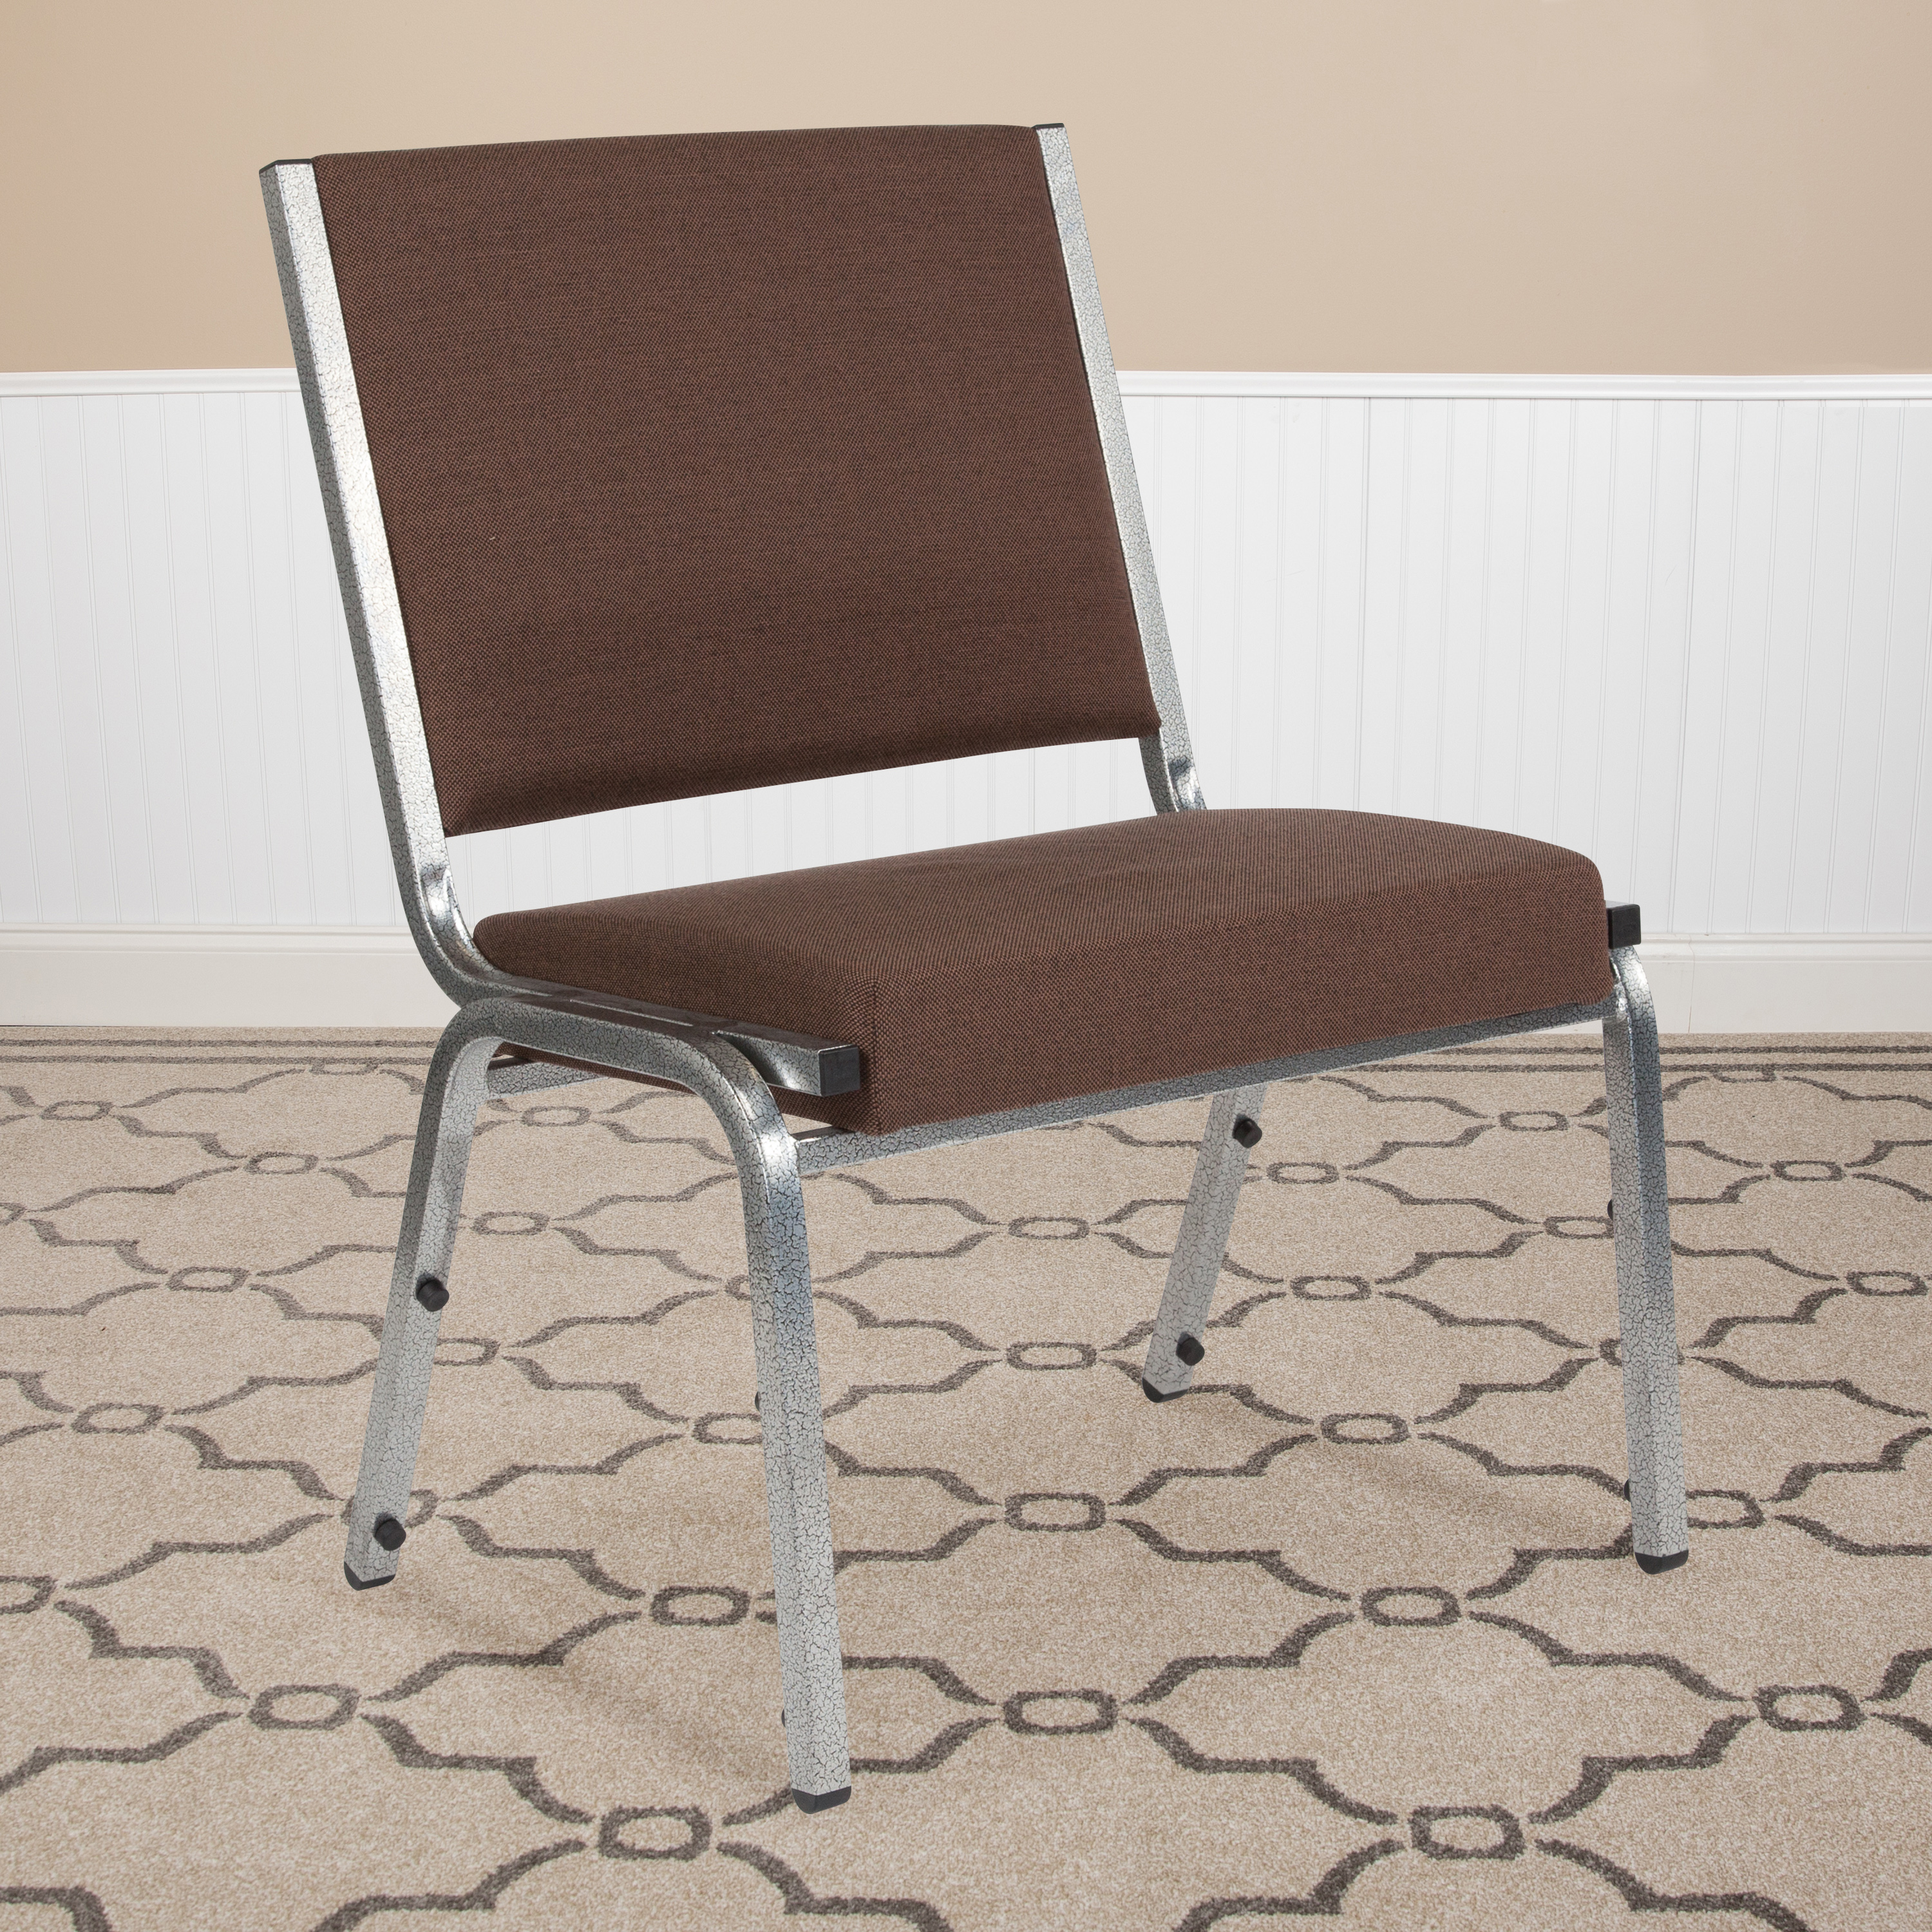 Flash Furniture HERCULES Series 1000 lb. Rated Brown Antimicrobial Fabric Bariatric Medical Reception Chair - image 2 of 6